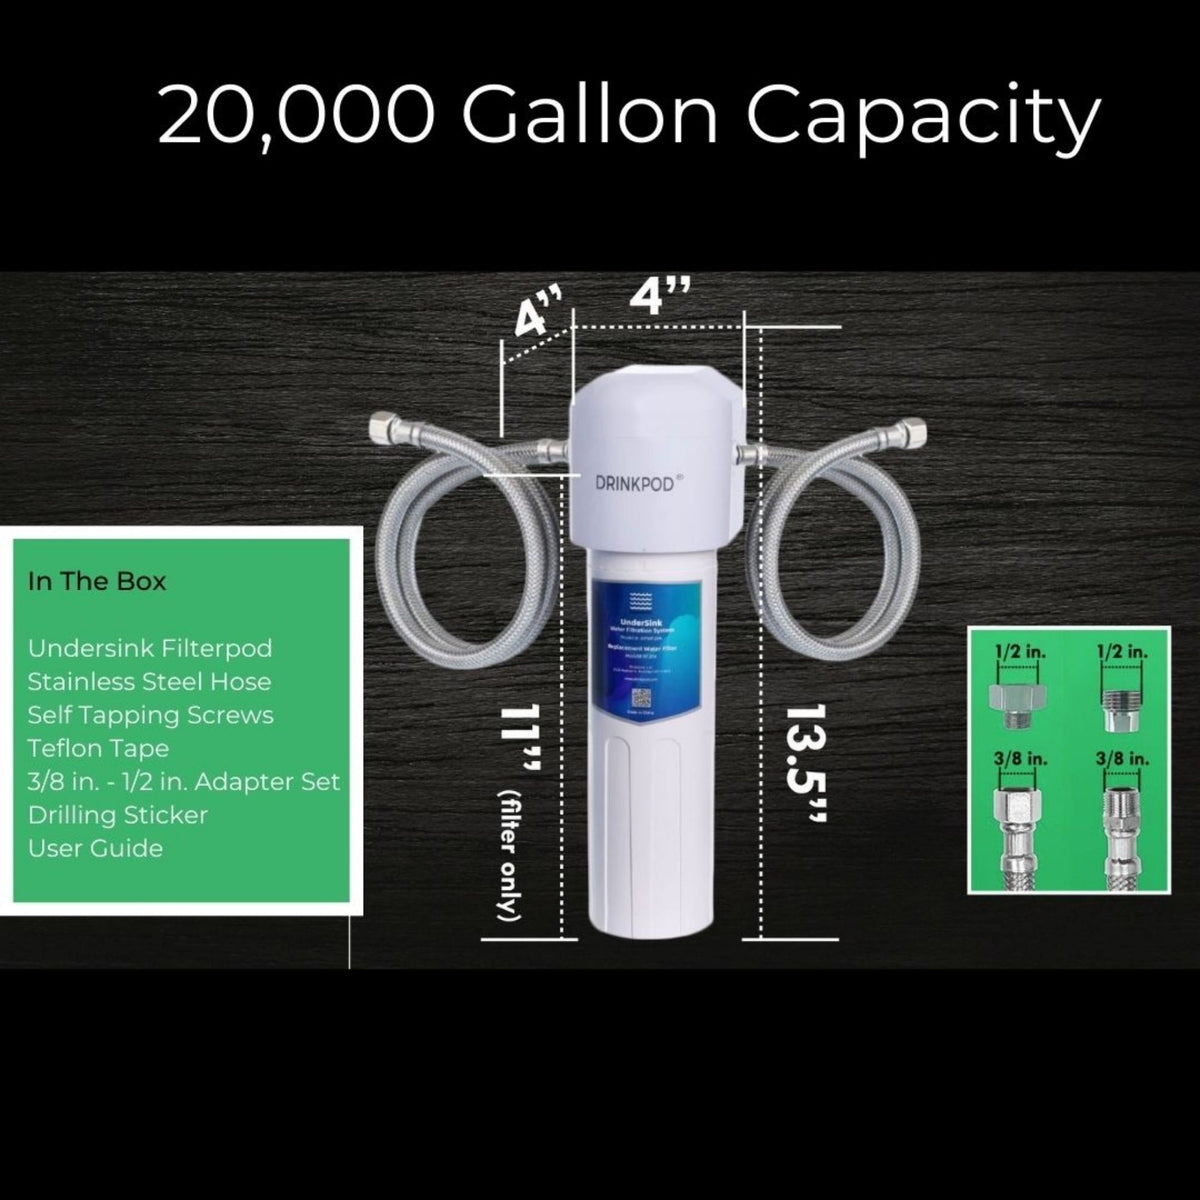 Under Sink Drinking Water Filter System, 3 Years or 20K Ultra High Capacity NSF 42 Certified, Direct Connect Under Counter, 0.5 Micron Removes 99.99% Chlorine Odor